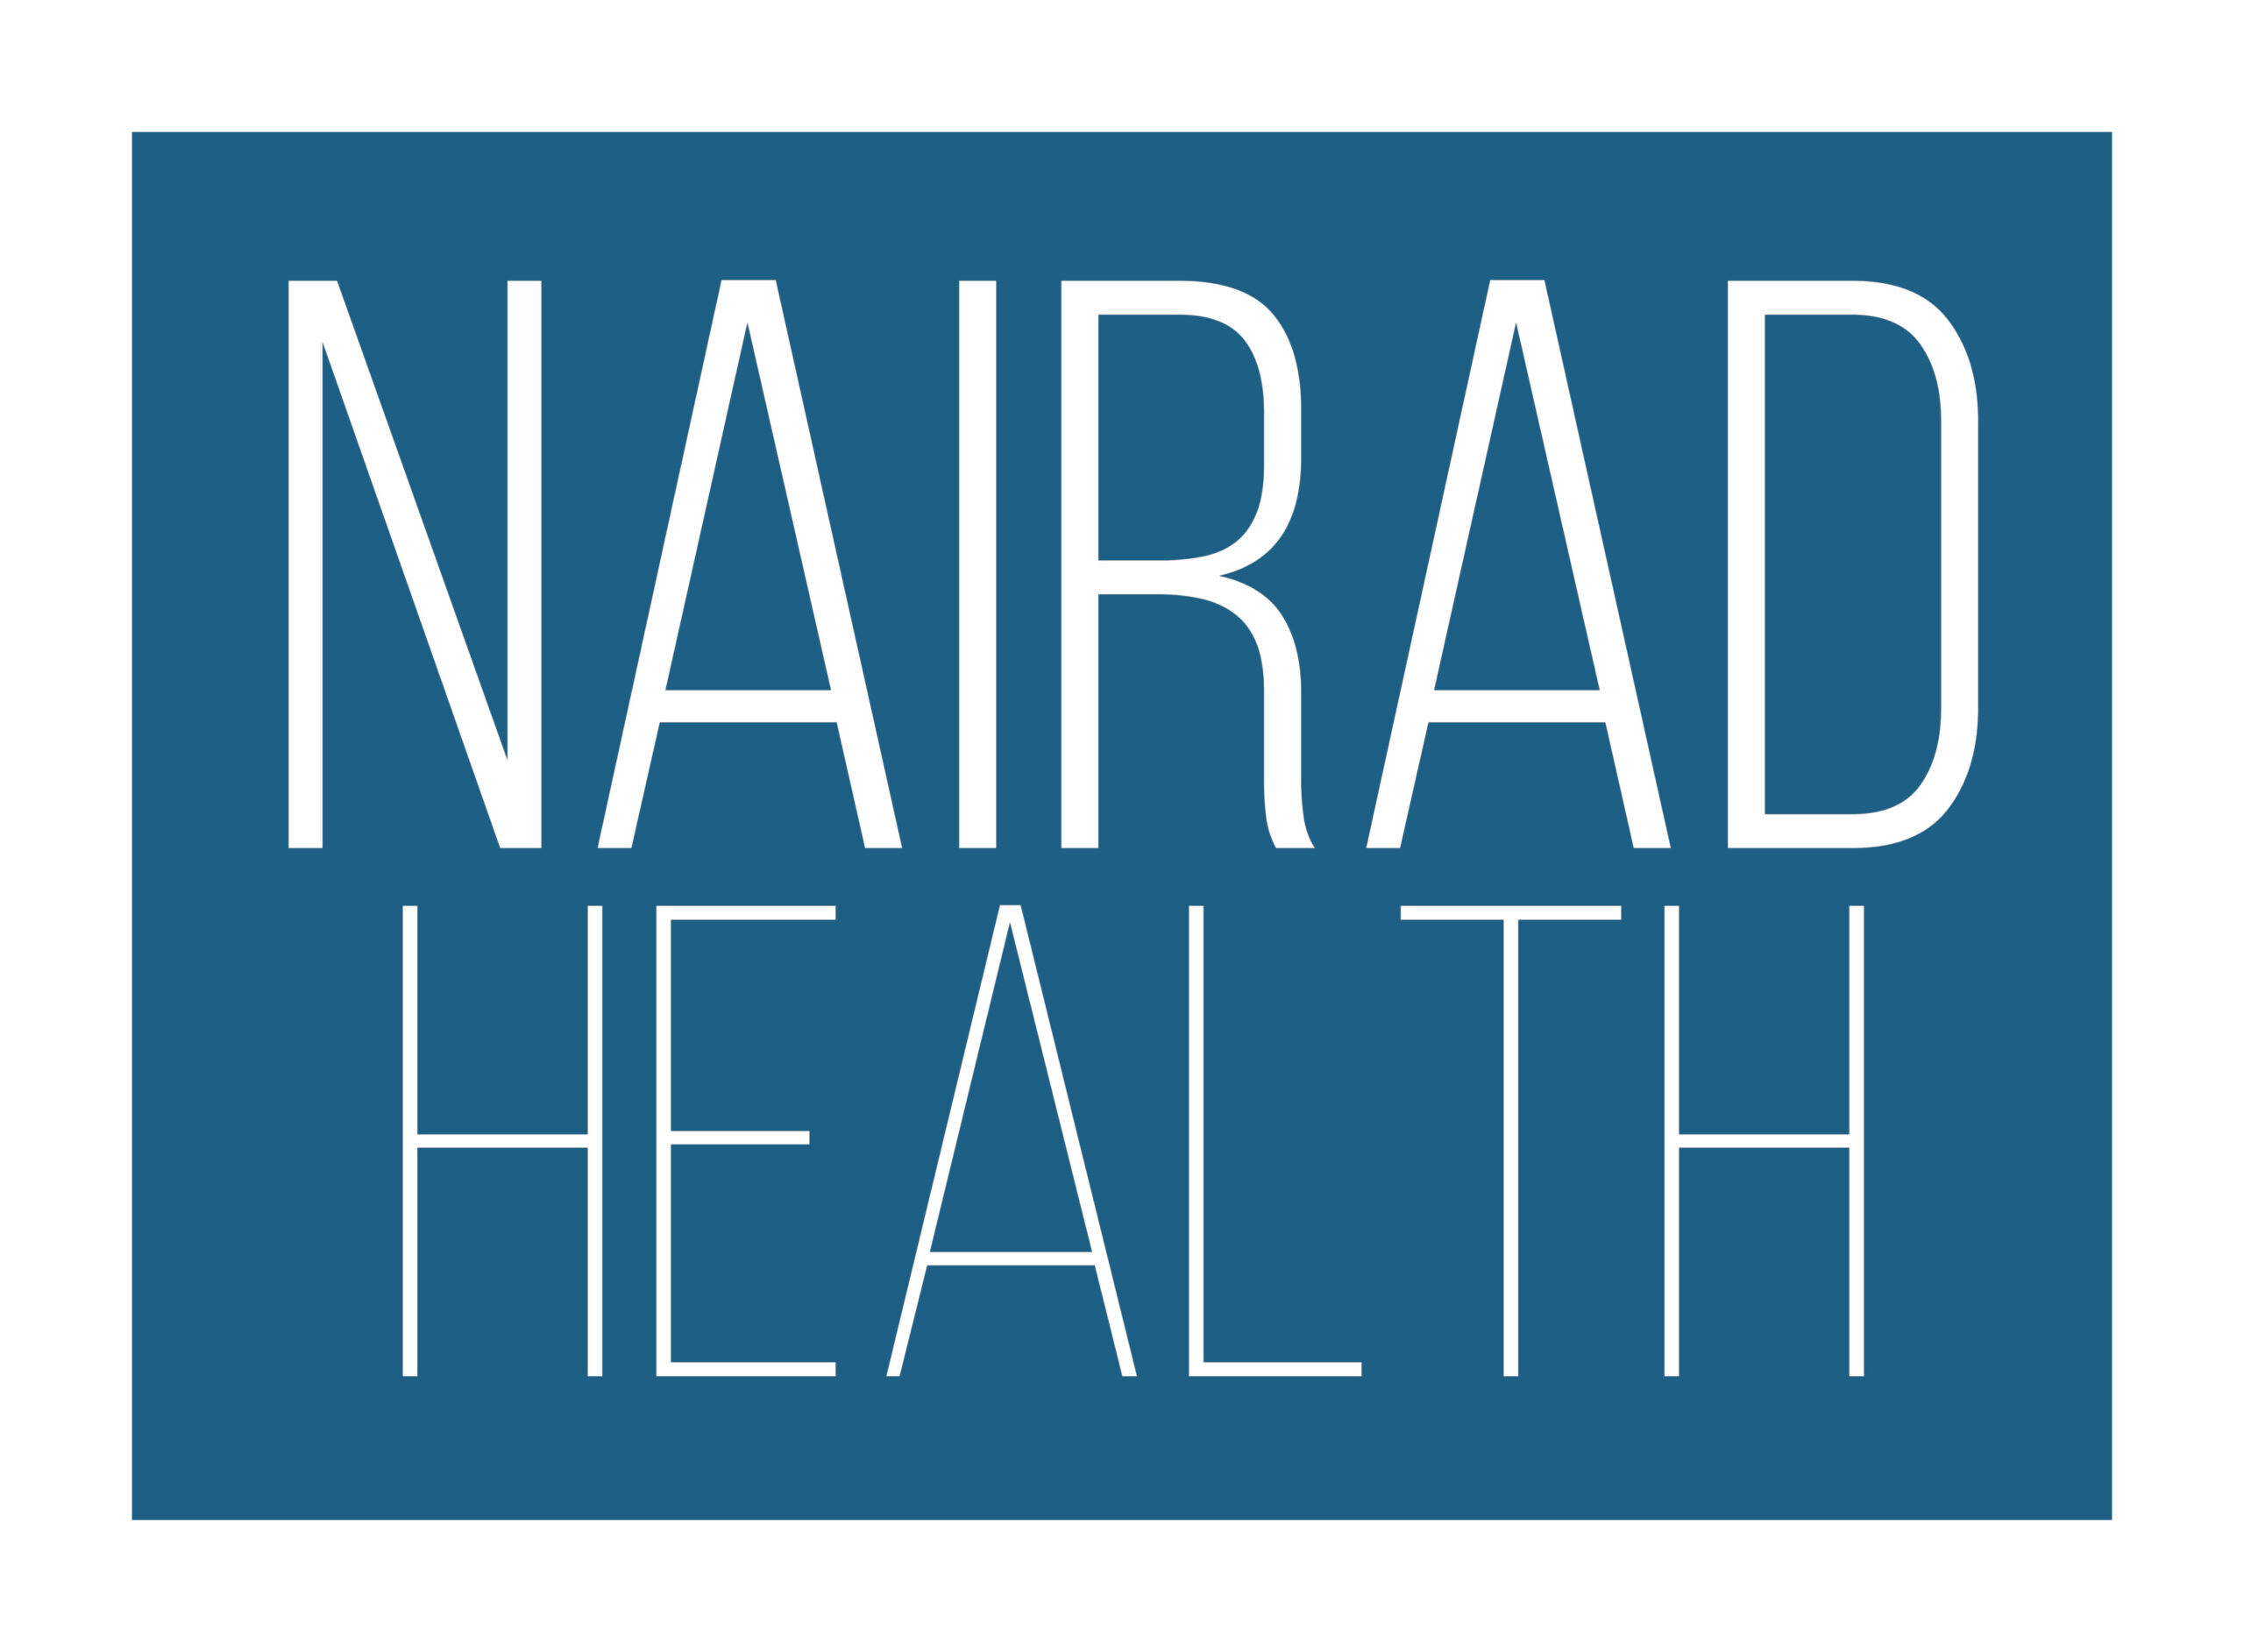 Nairad Health outpatient 